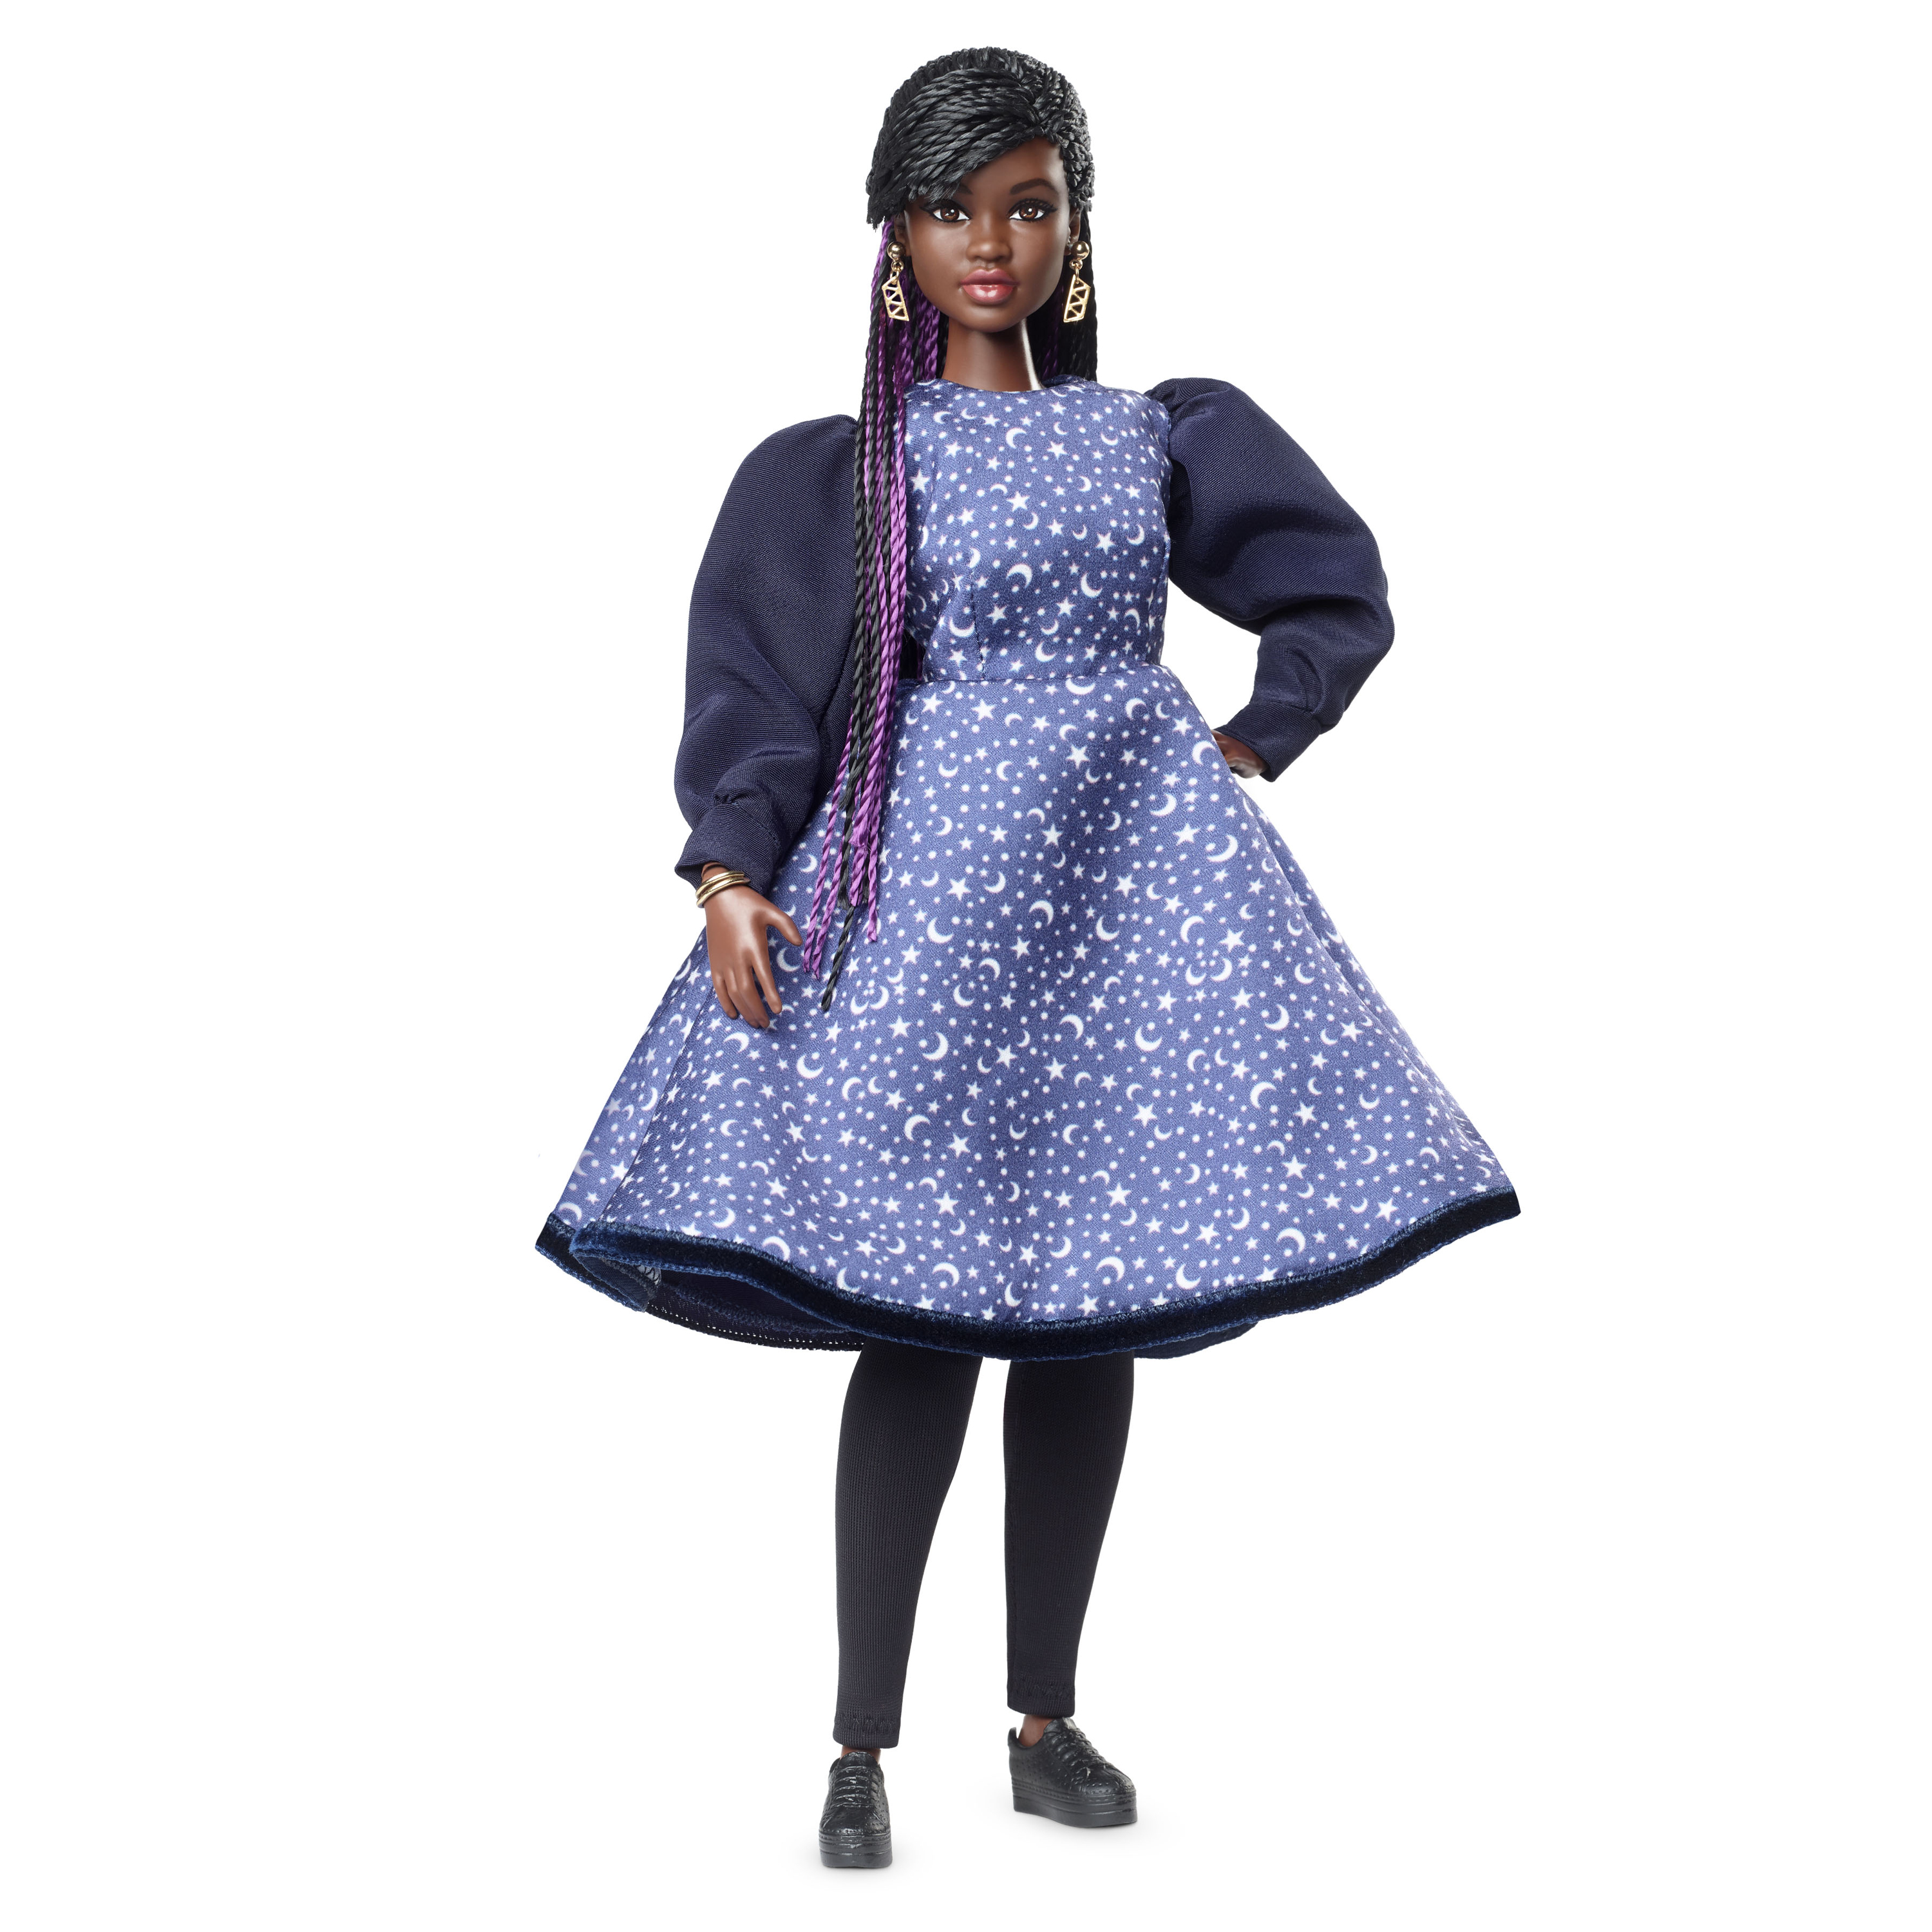 fiets Beheren toon Barbie made in likeness of UK scientist for promoting Stem subjects to girls